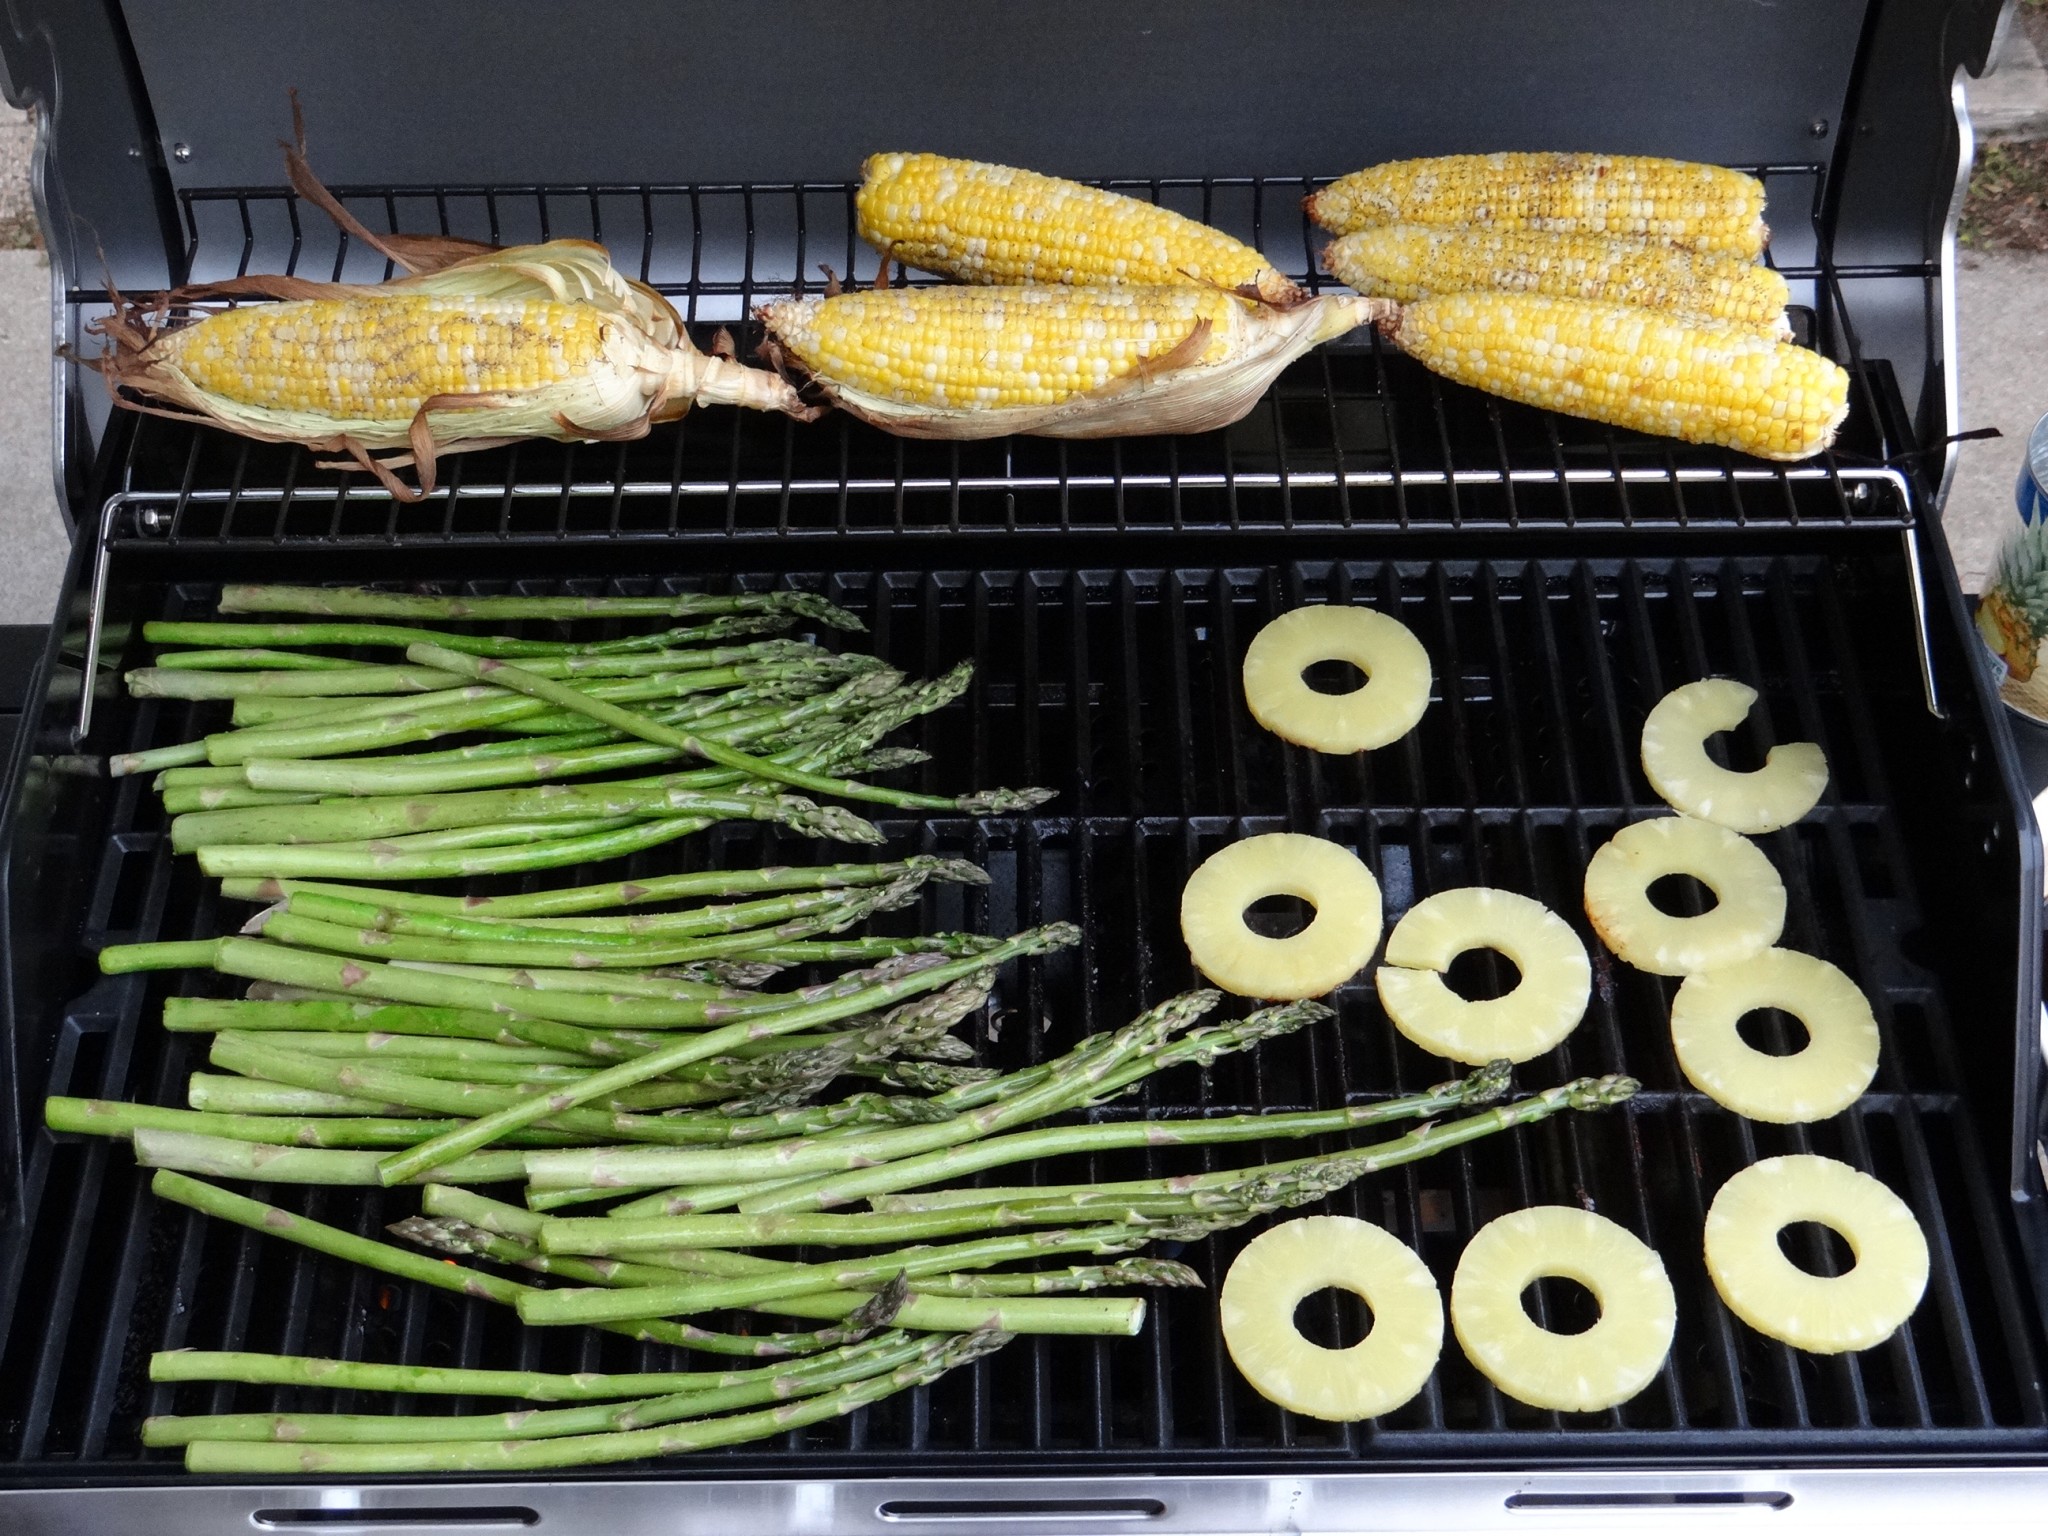 Grilling various fruits and vegetables. Photo by Greg Wagner.